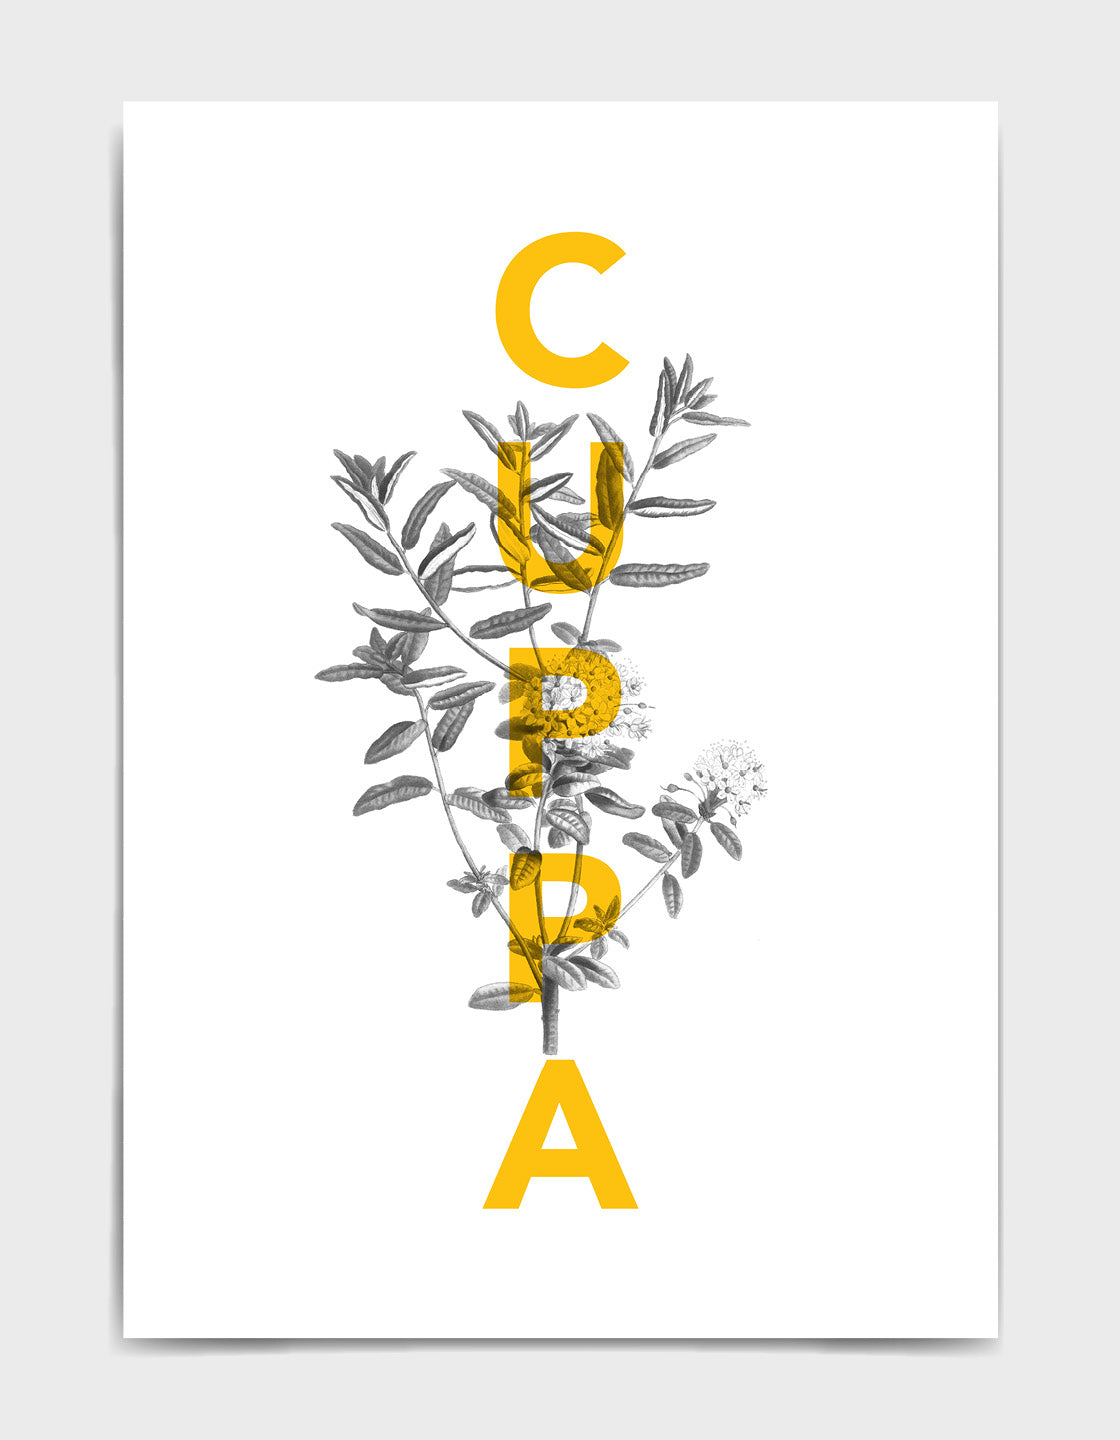 Cuppa typography print - features the text Cuppa in yellow overlaid onto a line drawing of a tea plant